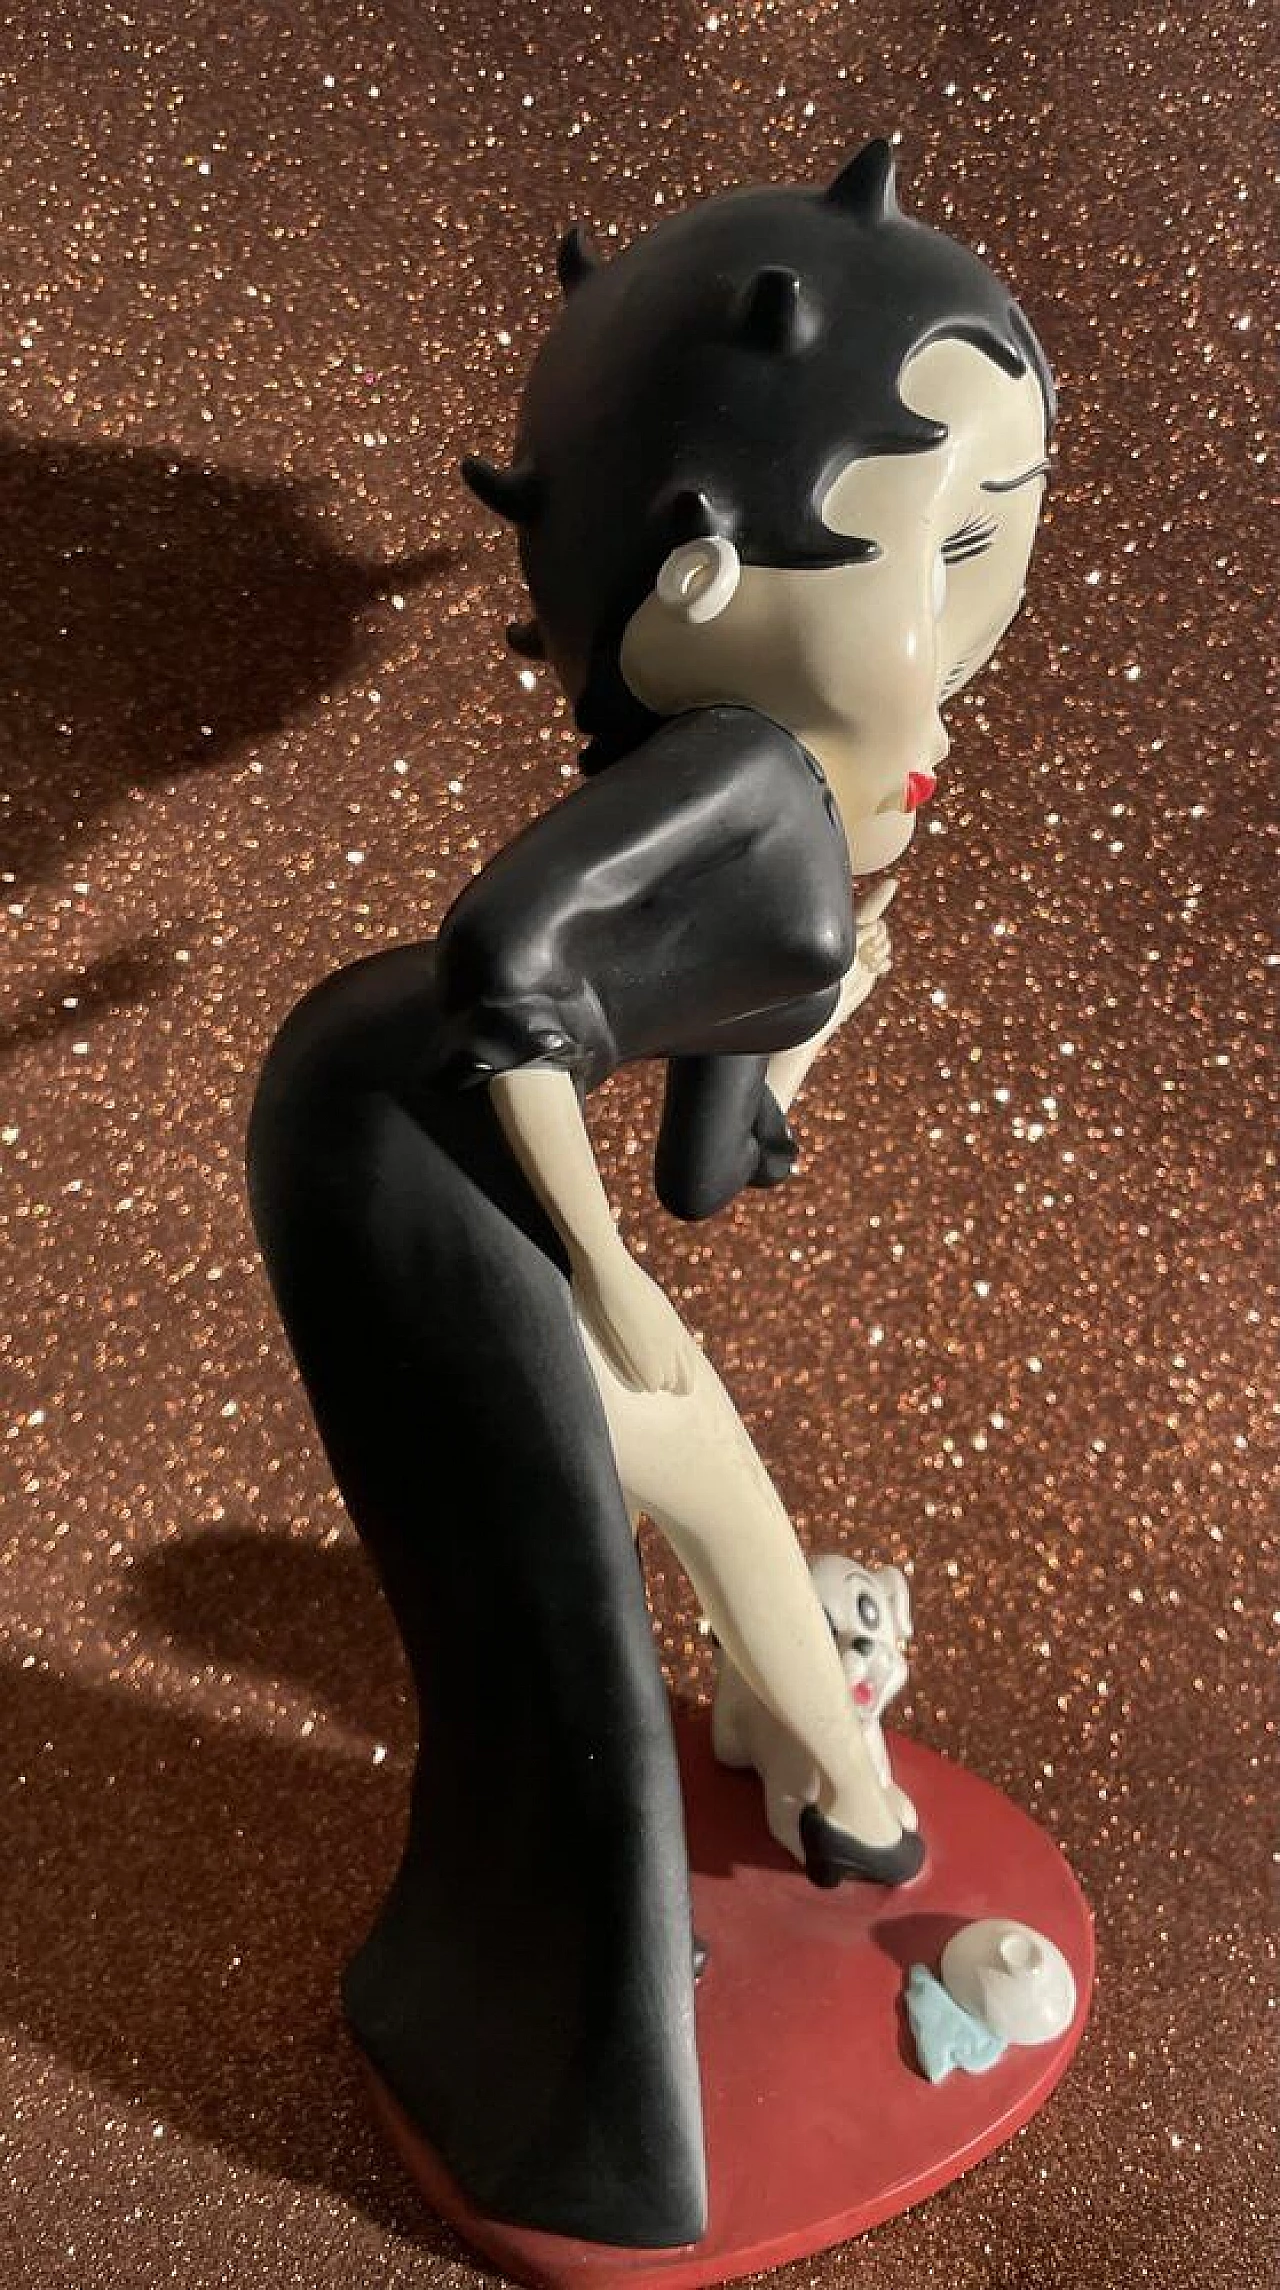 Betty Boop collectible figurine with black dress and small dog by Fleischer Studios, 2007 8